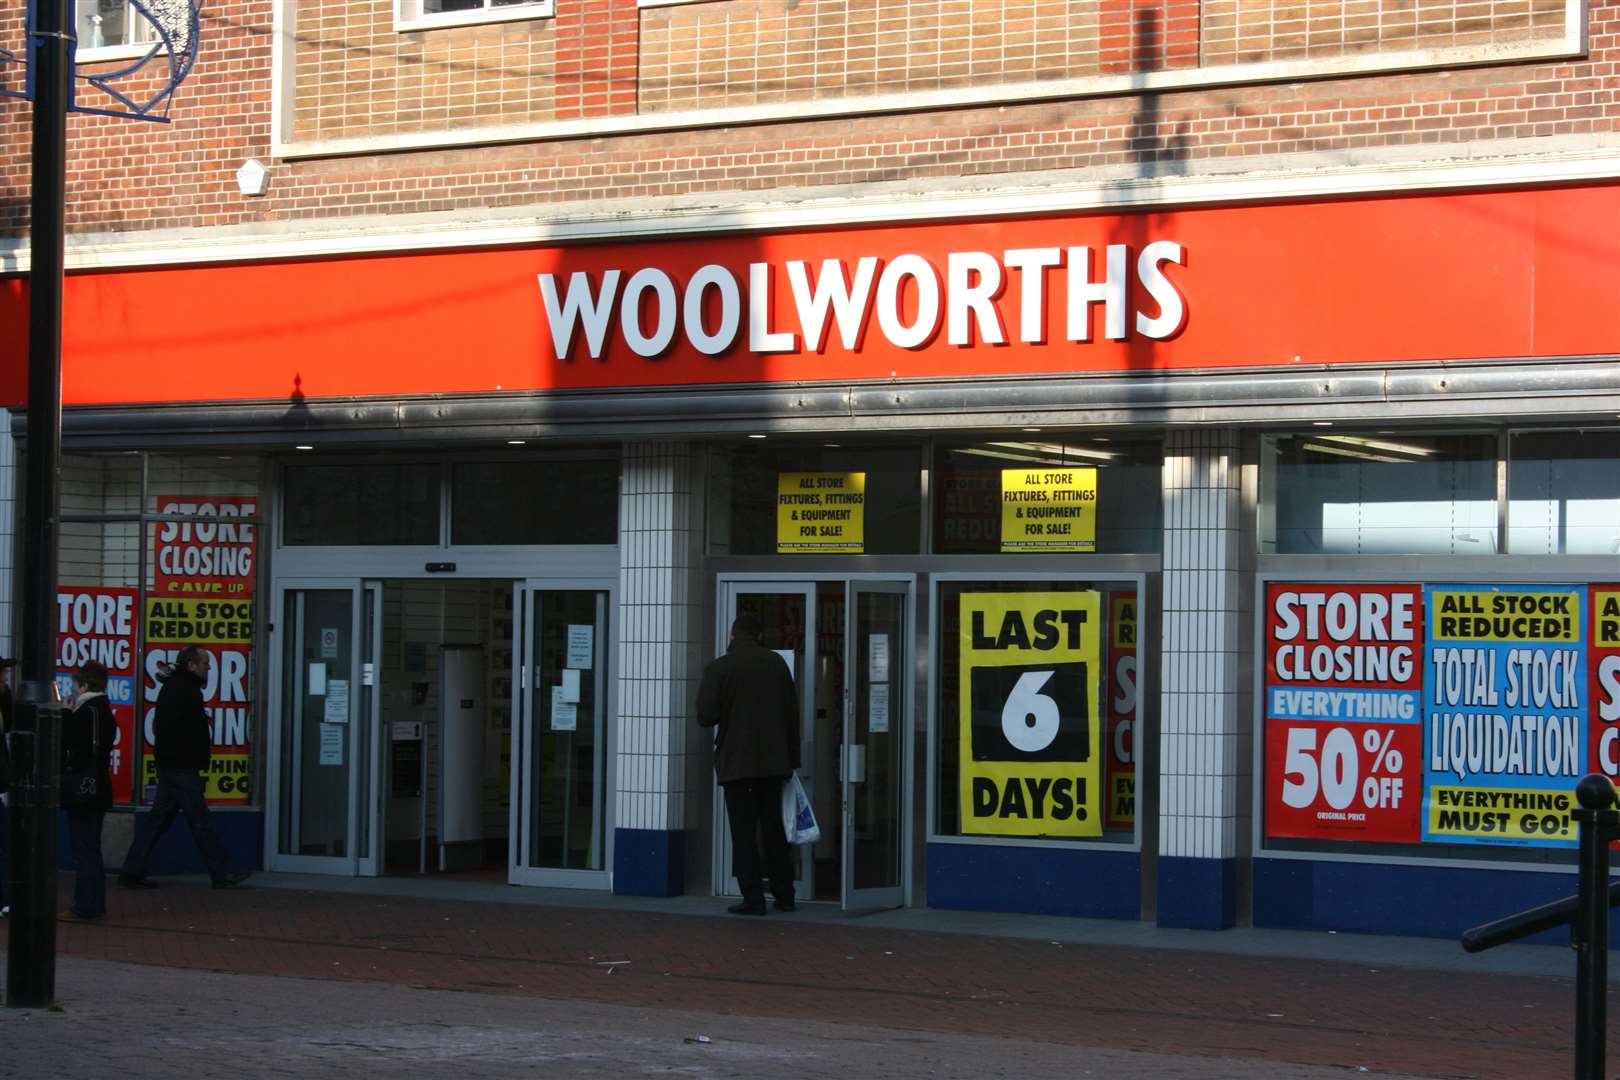 The former Woolworths site in Ashford just prior to its shock closure